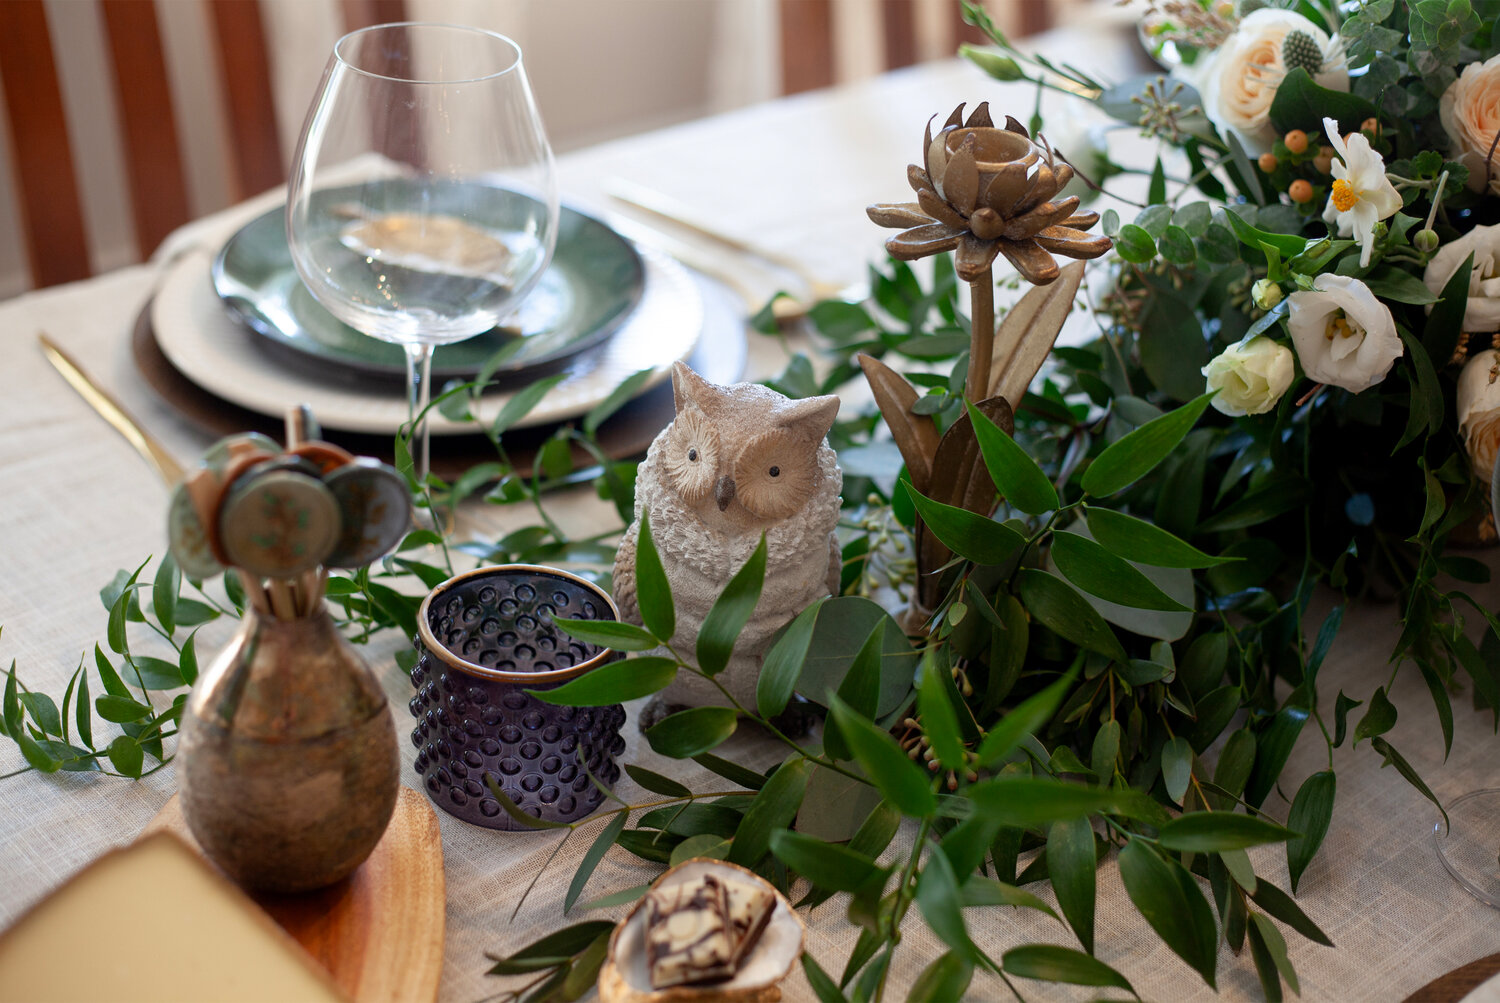 Woodland-inspired accents like candles, votives, linens, and more are evergreen pieces that can be put to use all year